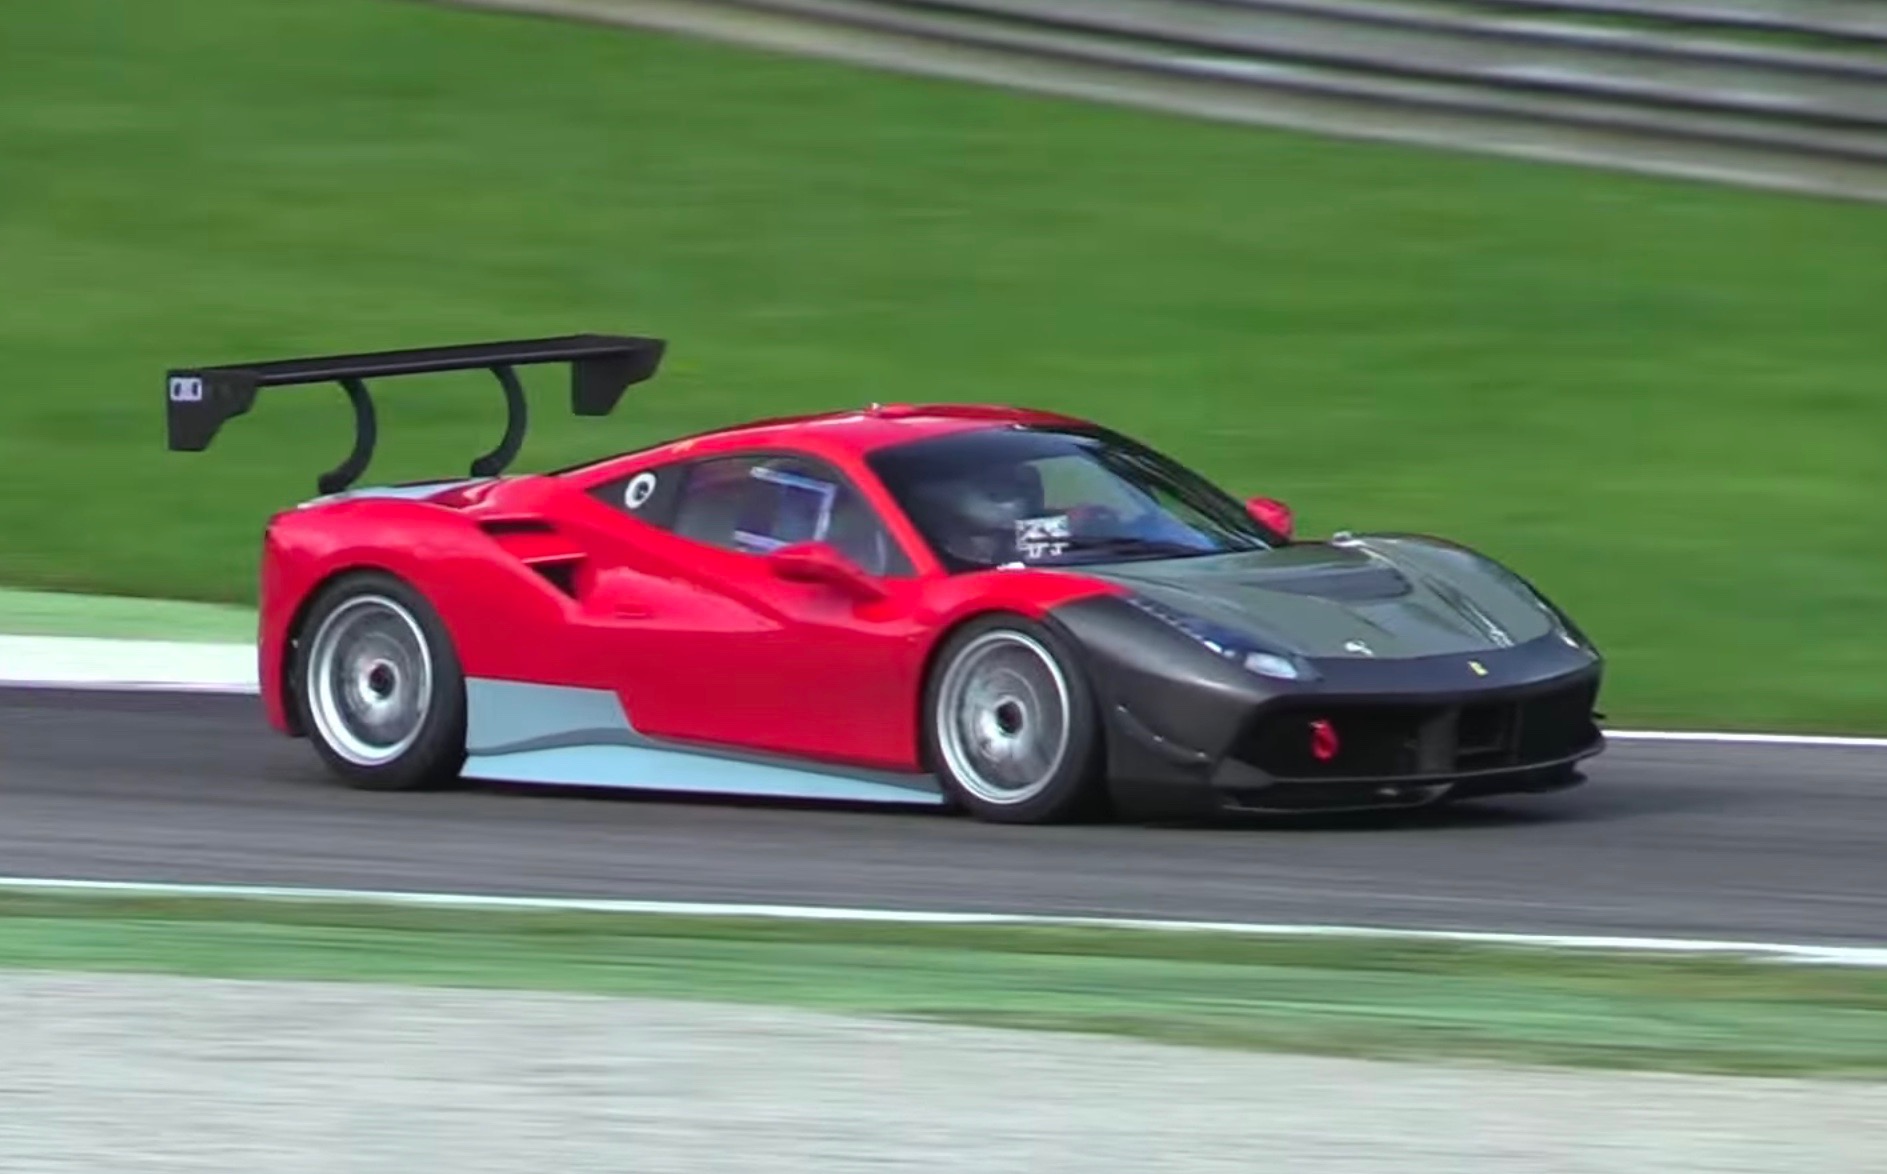 Ferrari 488 Challenge racer spotted testing at Monza (video)